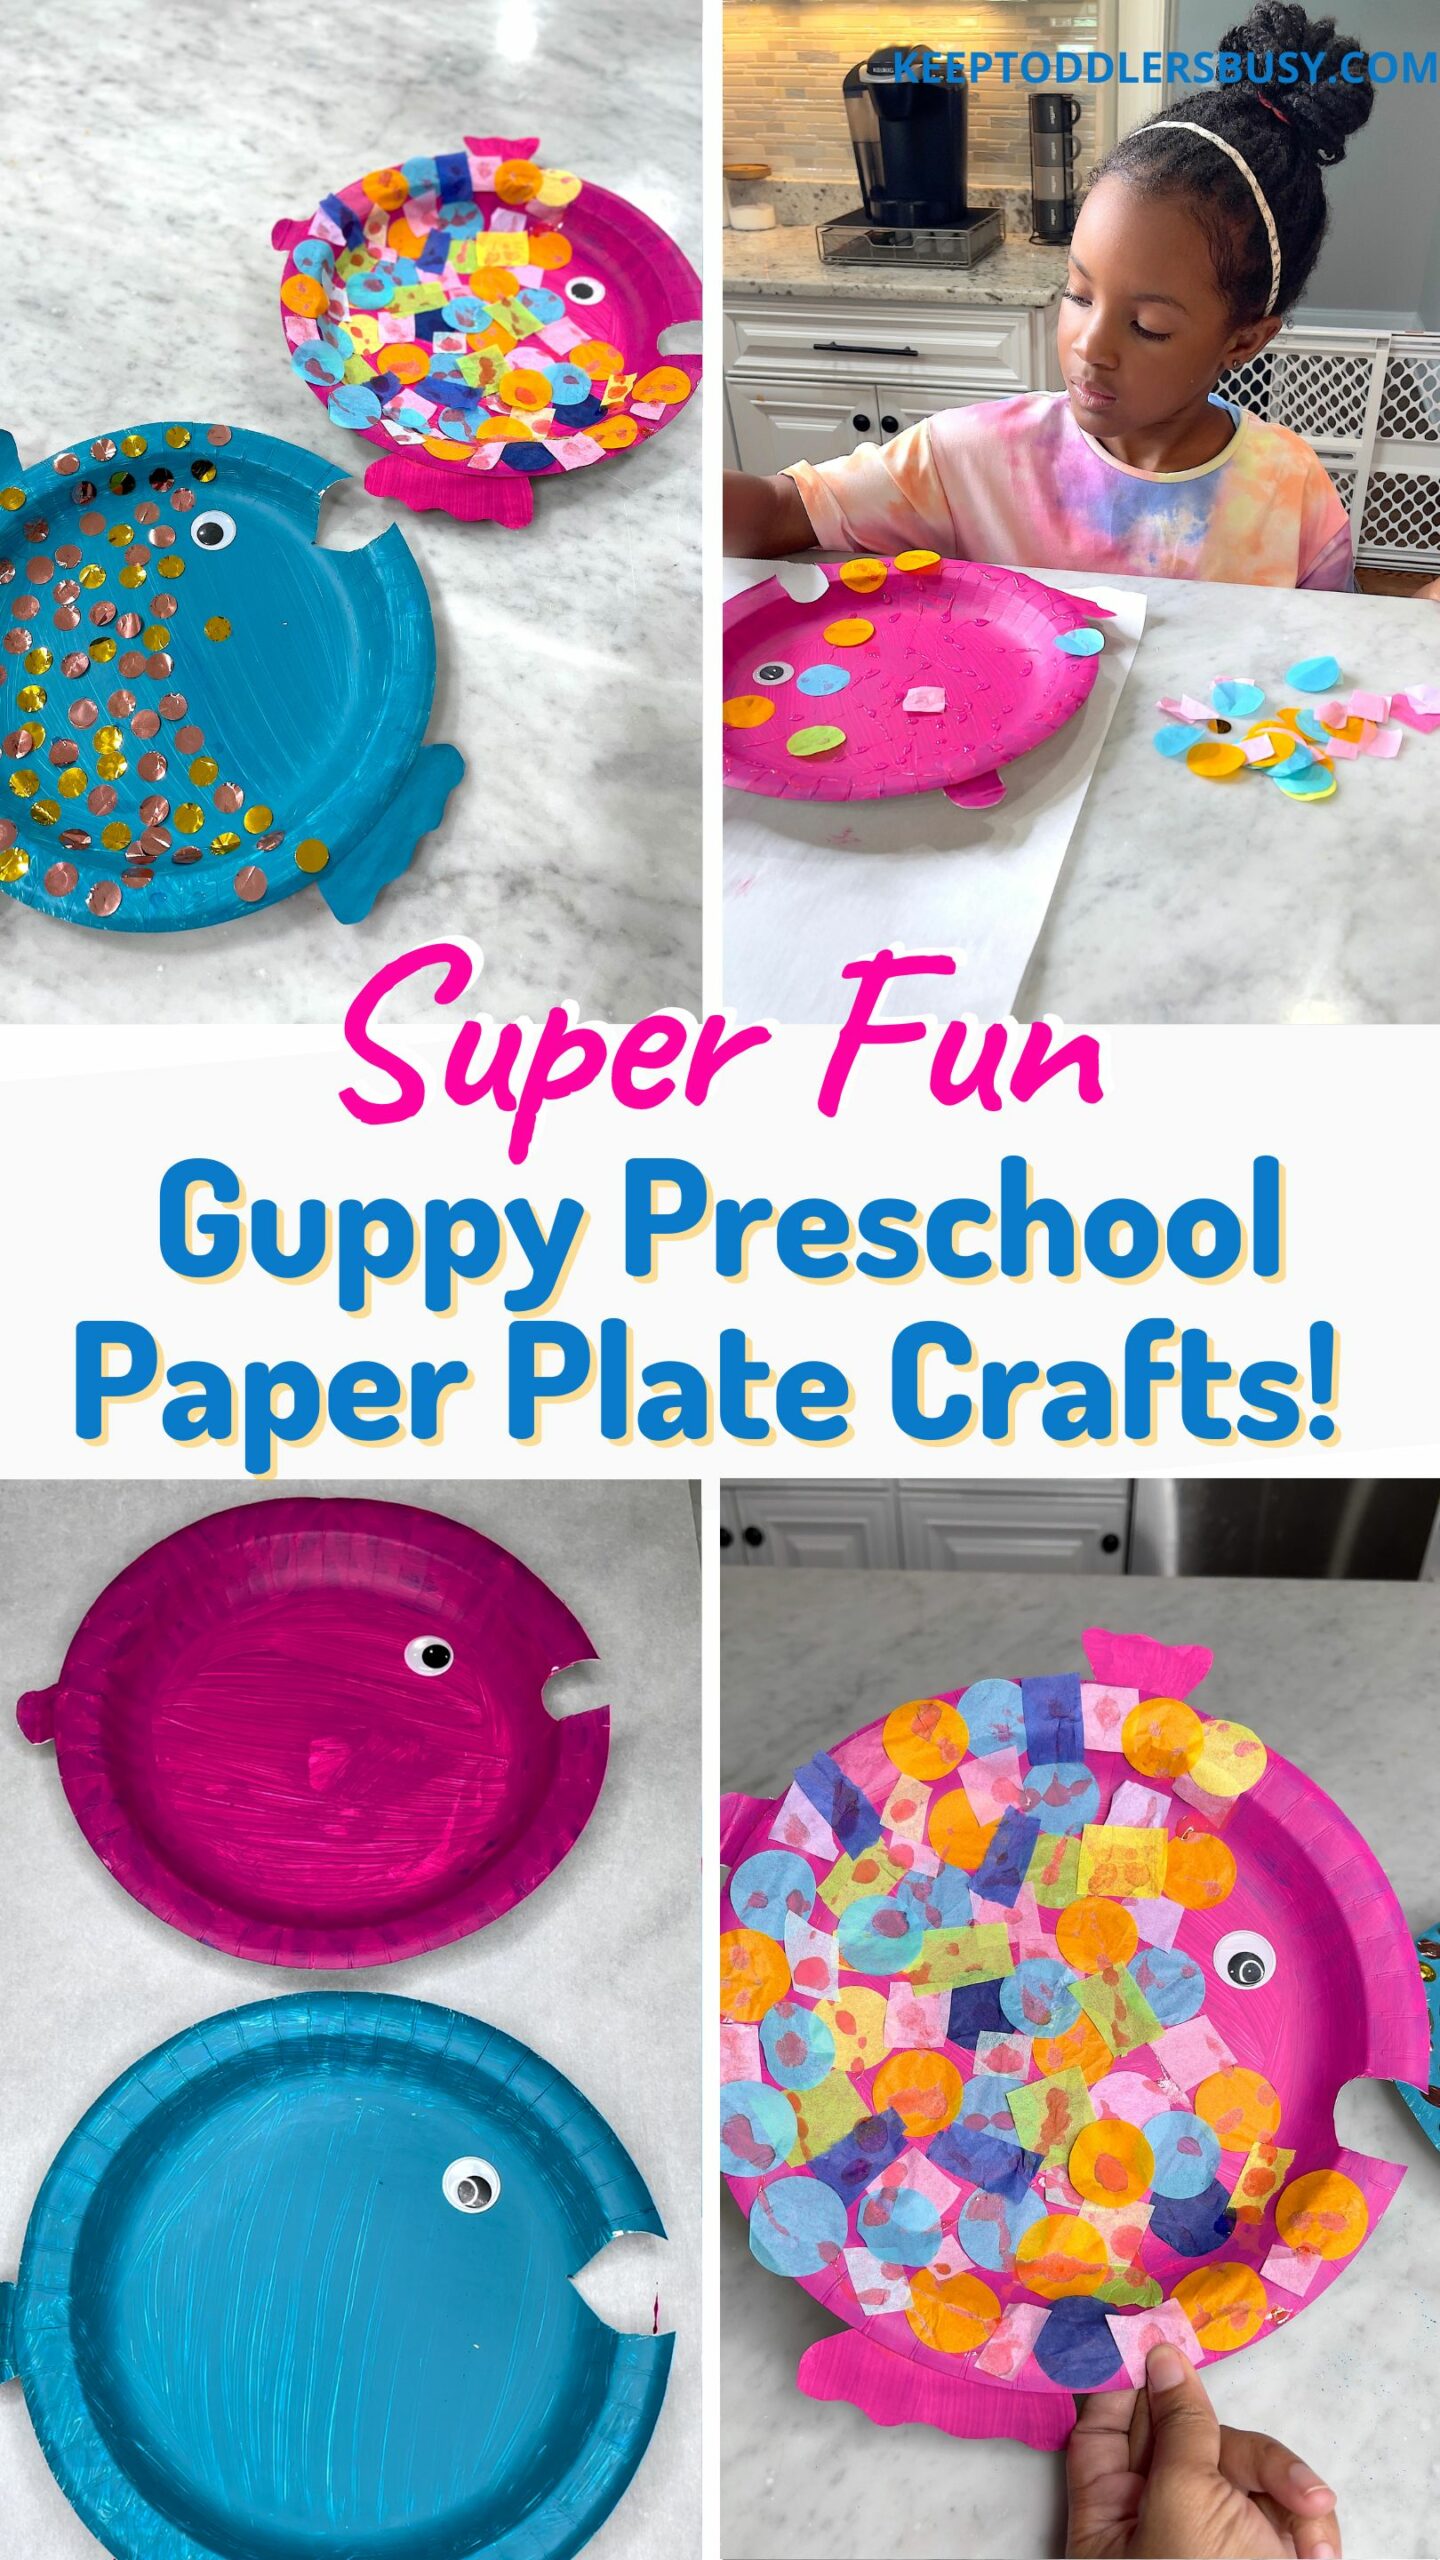 50+ Fun & Easy Paper Plate Crafts for Kids - Happy Toddler Playtime